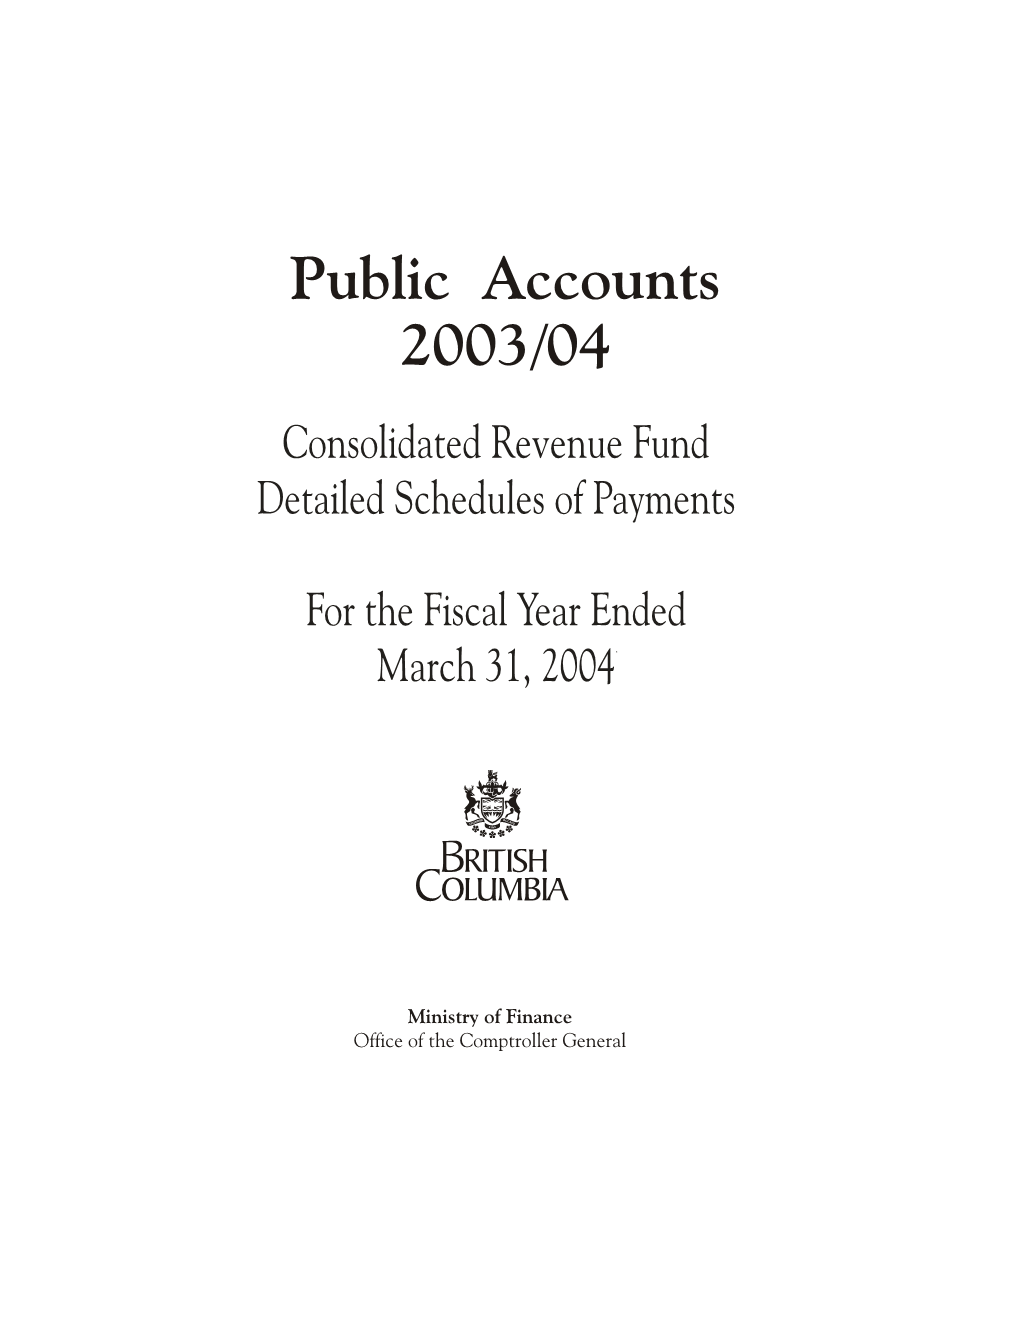 Public Accounts 2003/04 Consolidated Revenue Fund Detailed Schedules of Payments